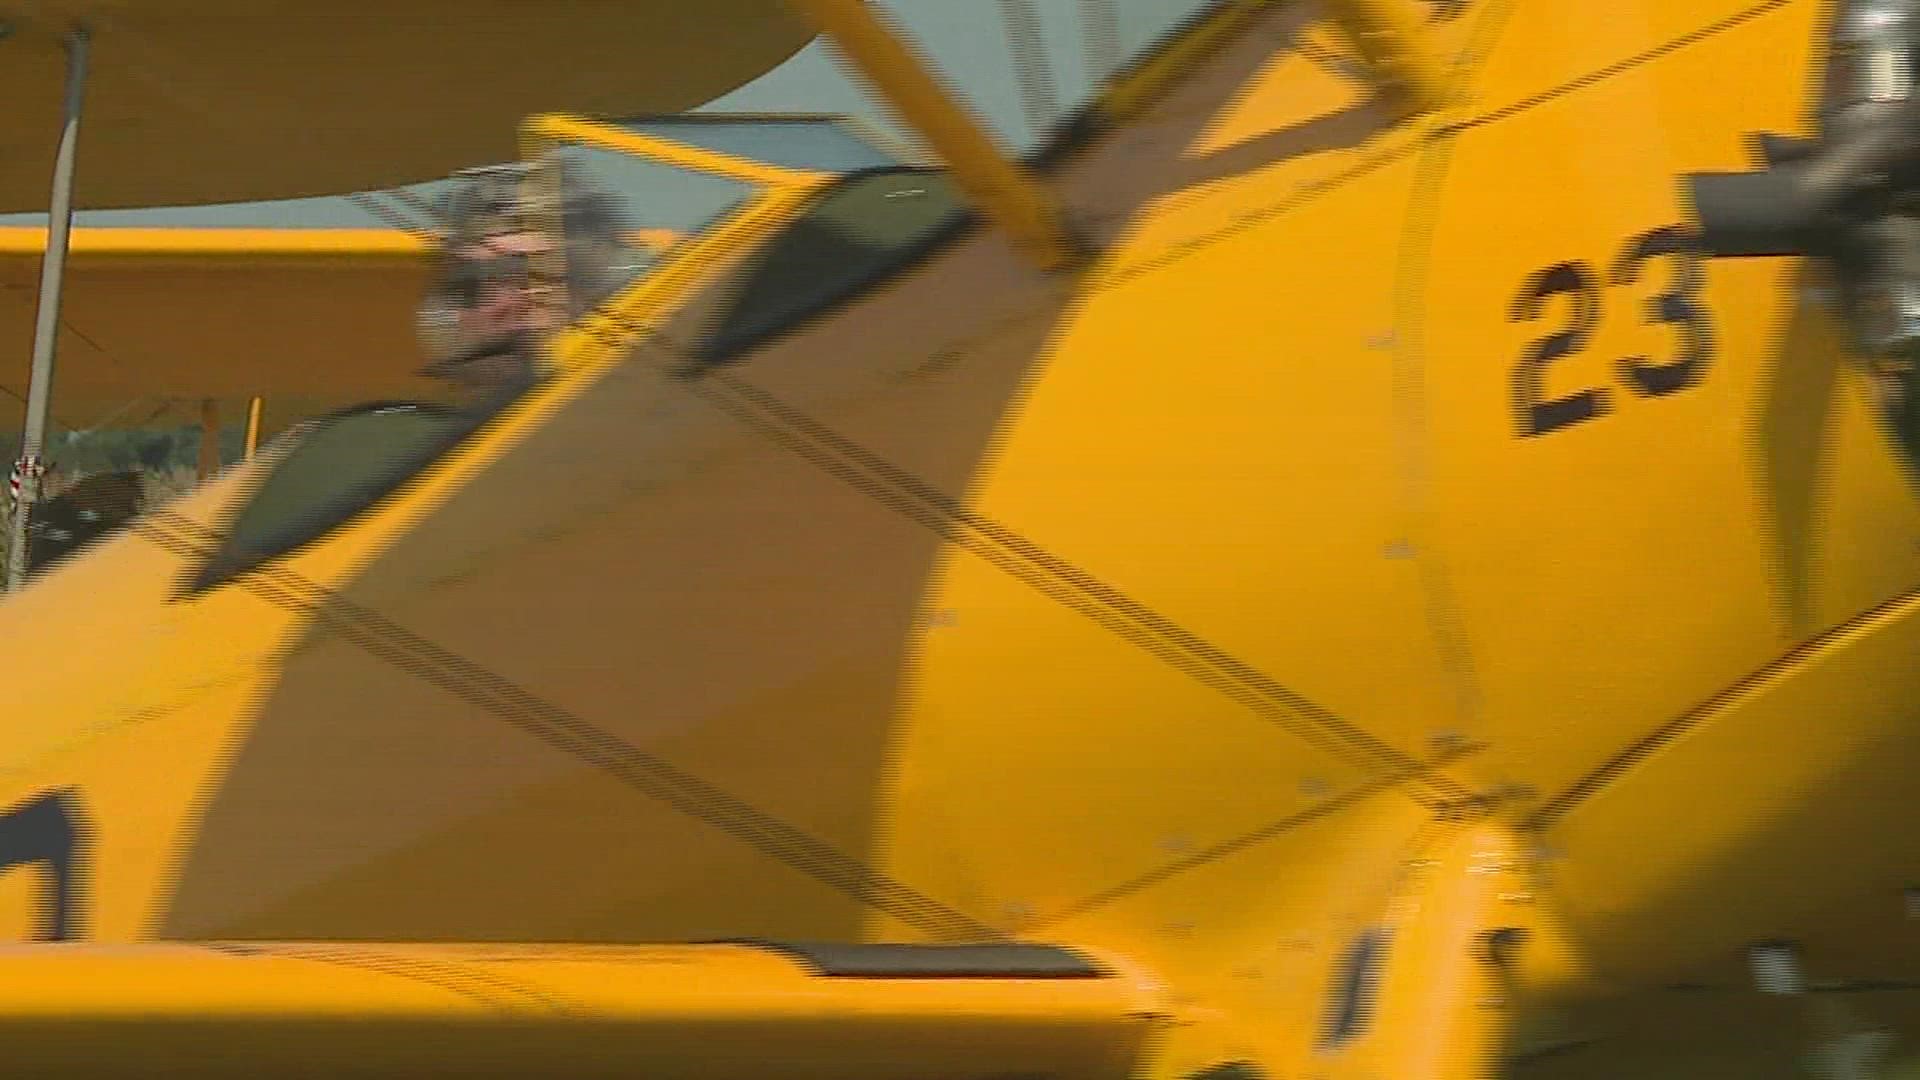 Dozens of planes are already at the airport. More than 150 Stearman planes are expected throughout the week for the 50th year of the fly-in.